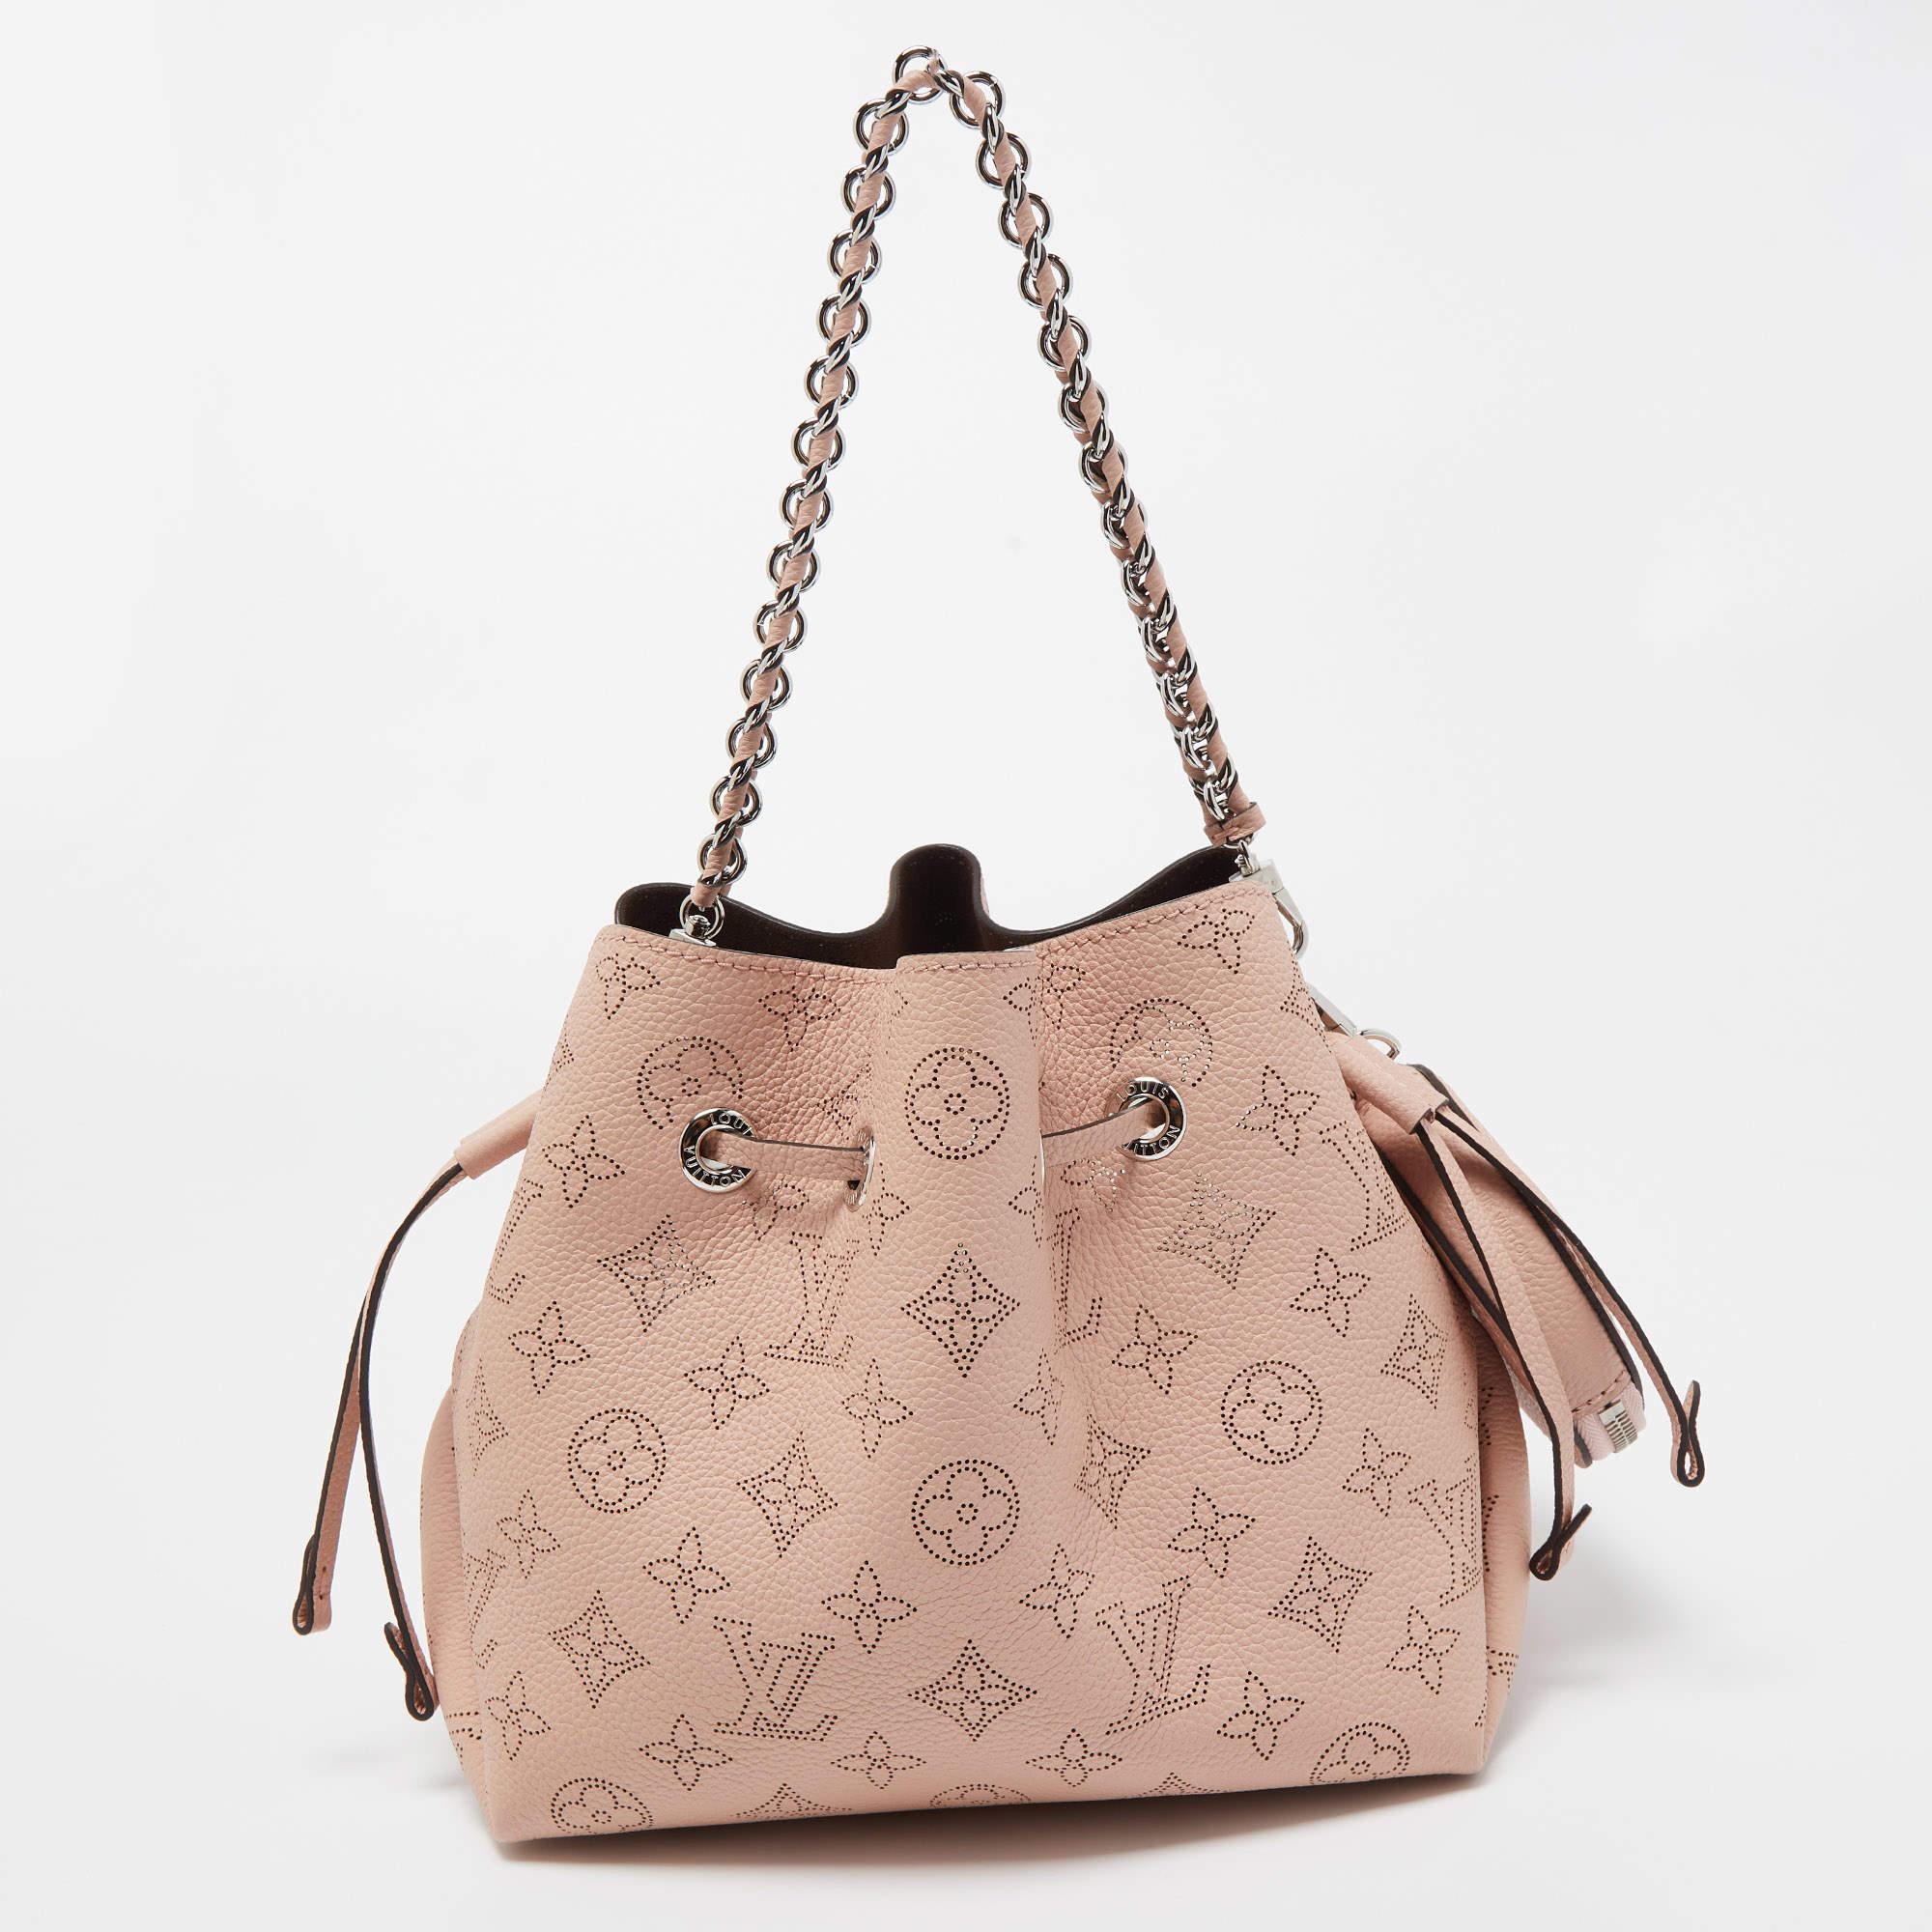 This wonderful Louis Vuitton design is made from Mahina leather and paired with silver-tone hardware. The bag has a bucket shape with a drawstring closure that secures the Alcantara interior. Complete with a chain handle and shoulder strap, it is an